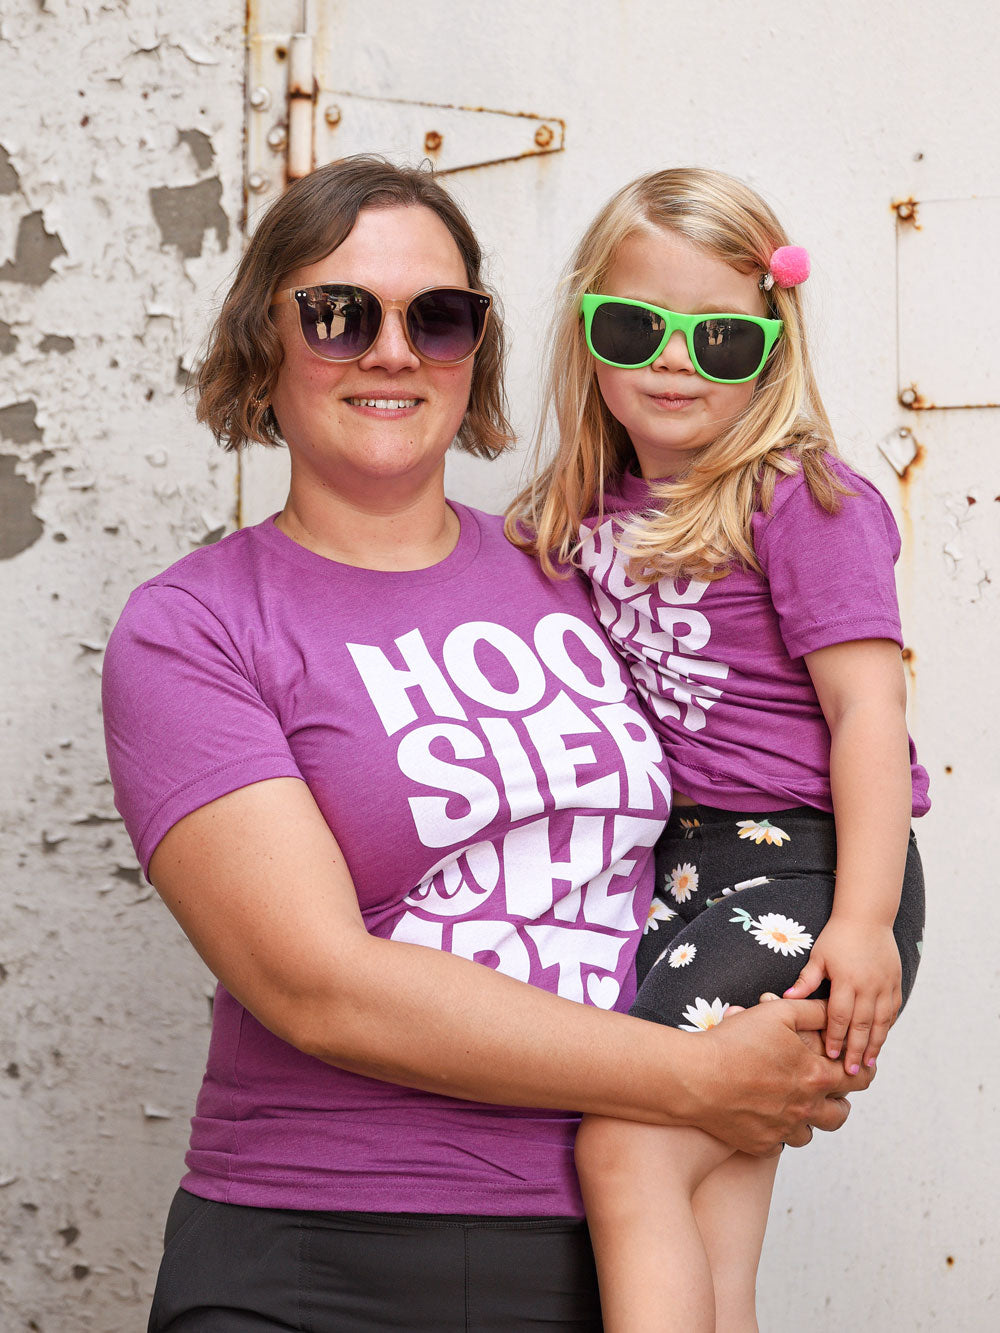 Hoosier at Heart magenta t-shirt on mom and daughter in sunglasses